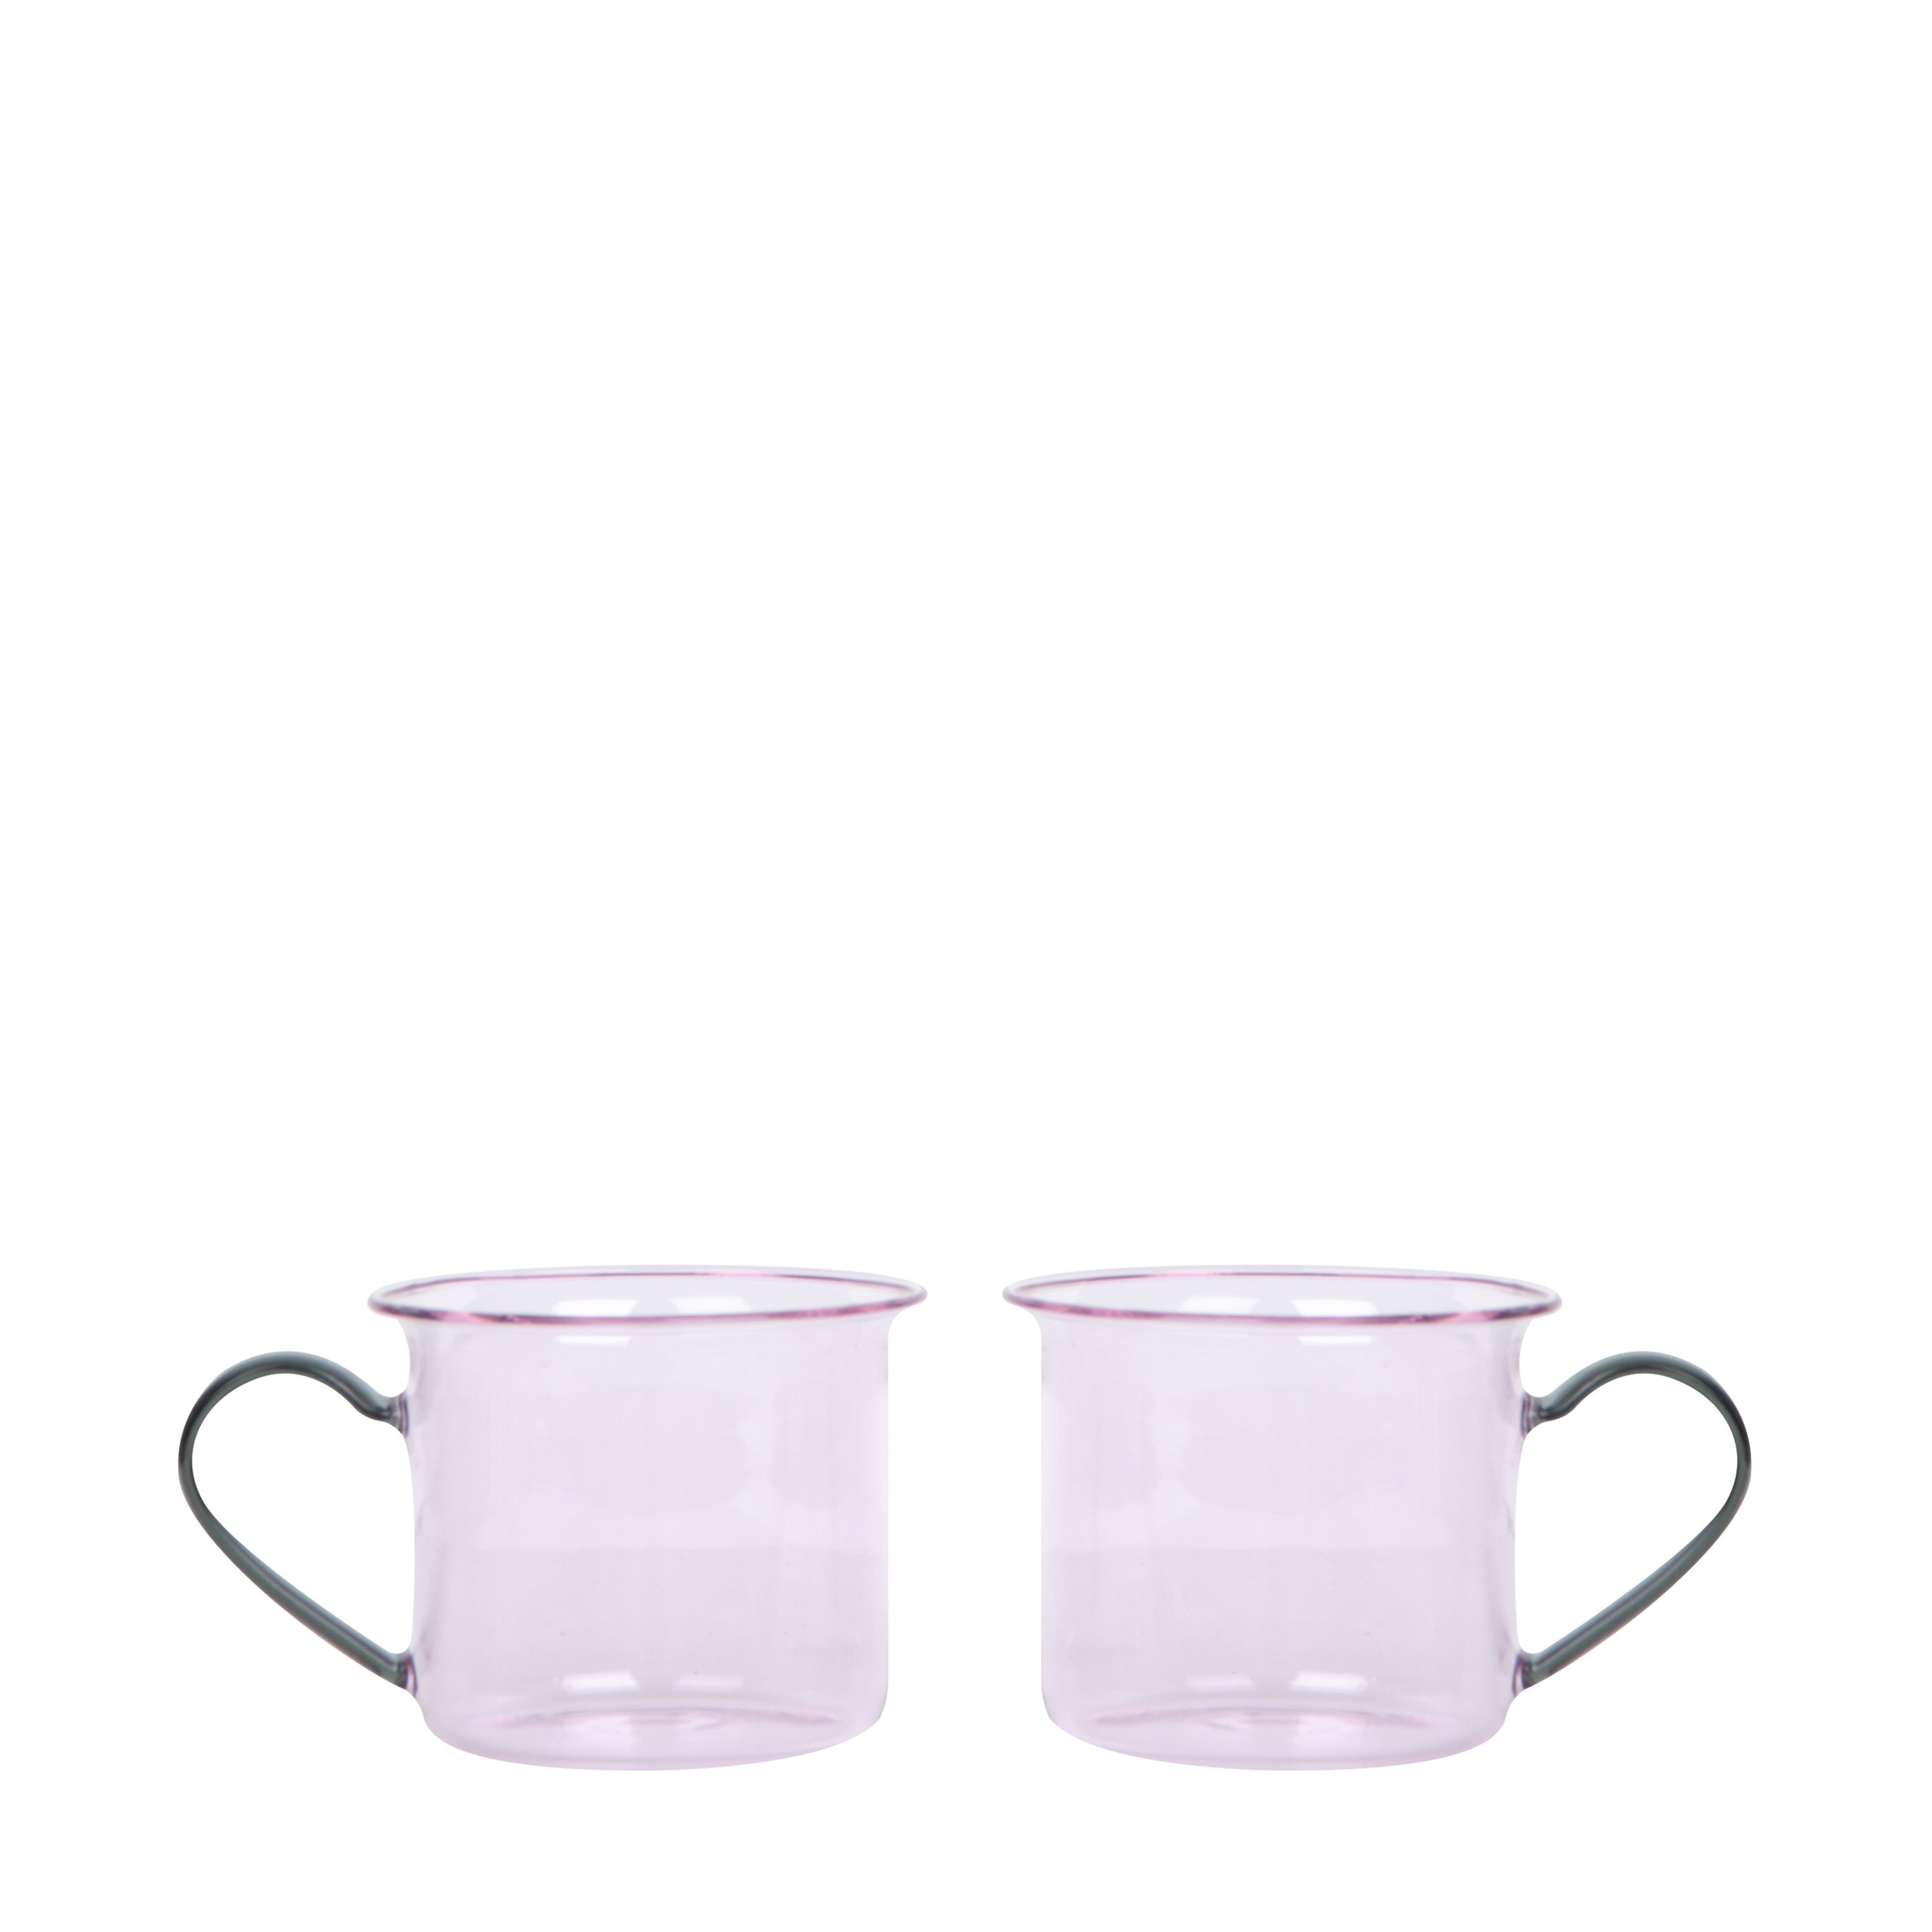 https://www.pockets.co.uk/media/catalog/product/cache/afca9a4301a4f957e27126911791b579/h/a/hay_aw21_lifestyle_borosilicate_pink_1.jpg